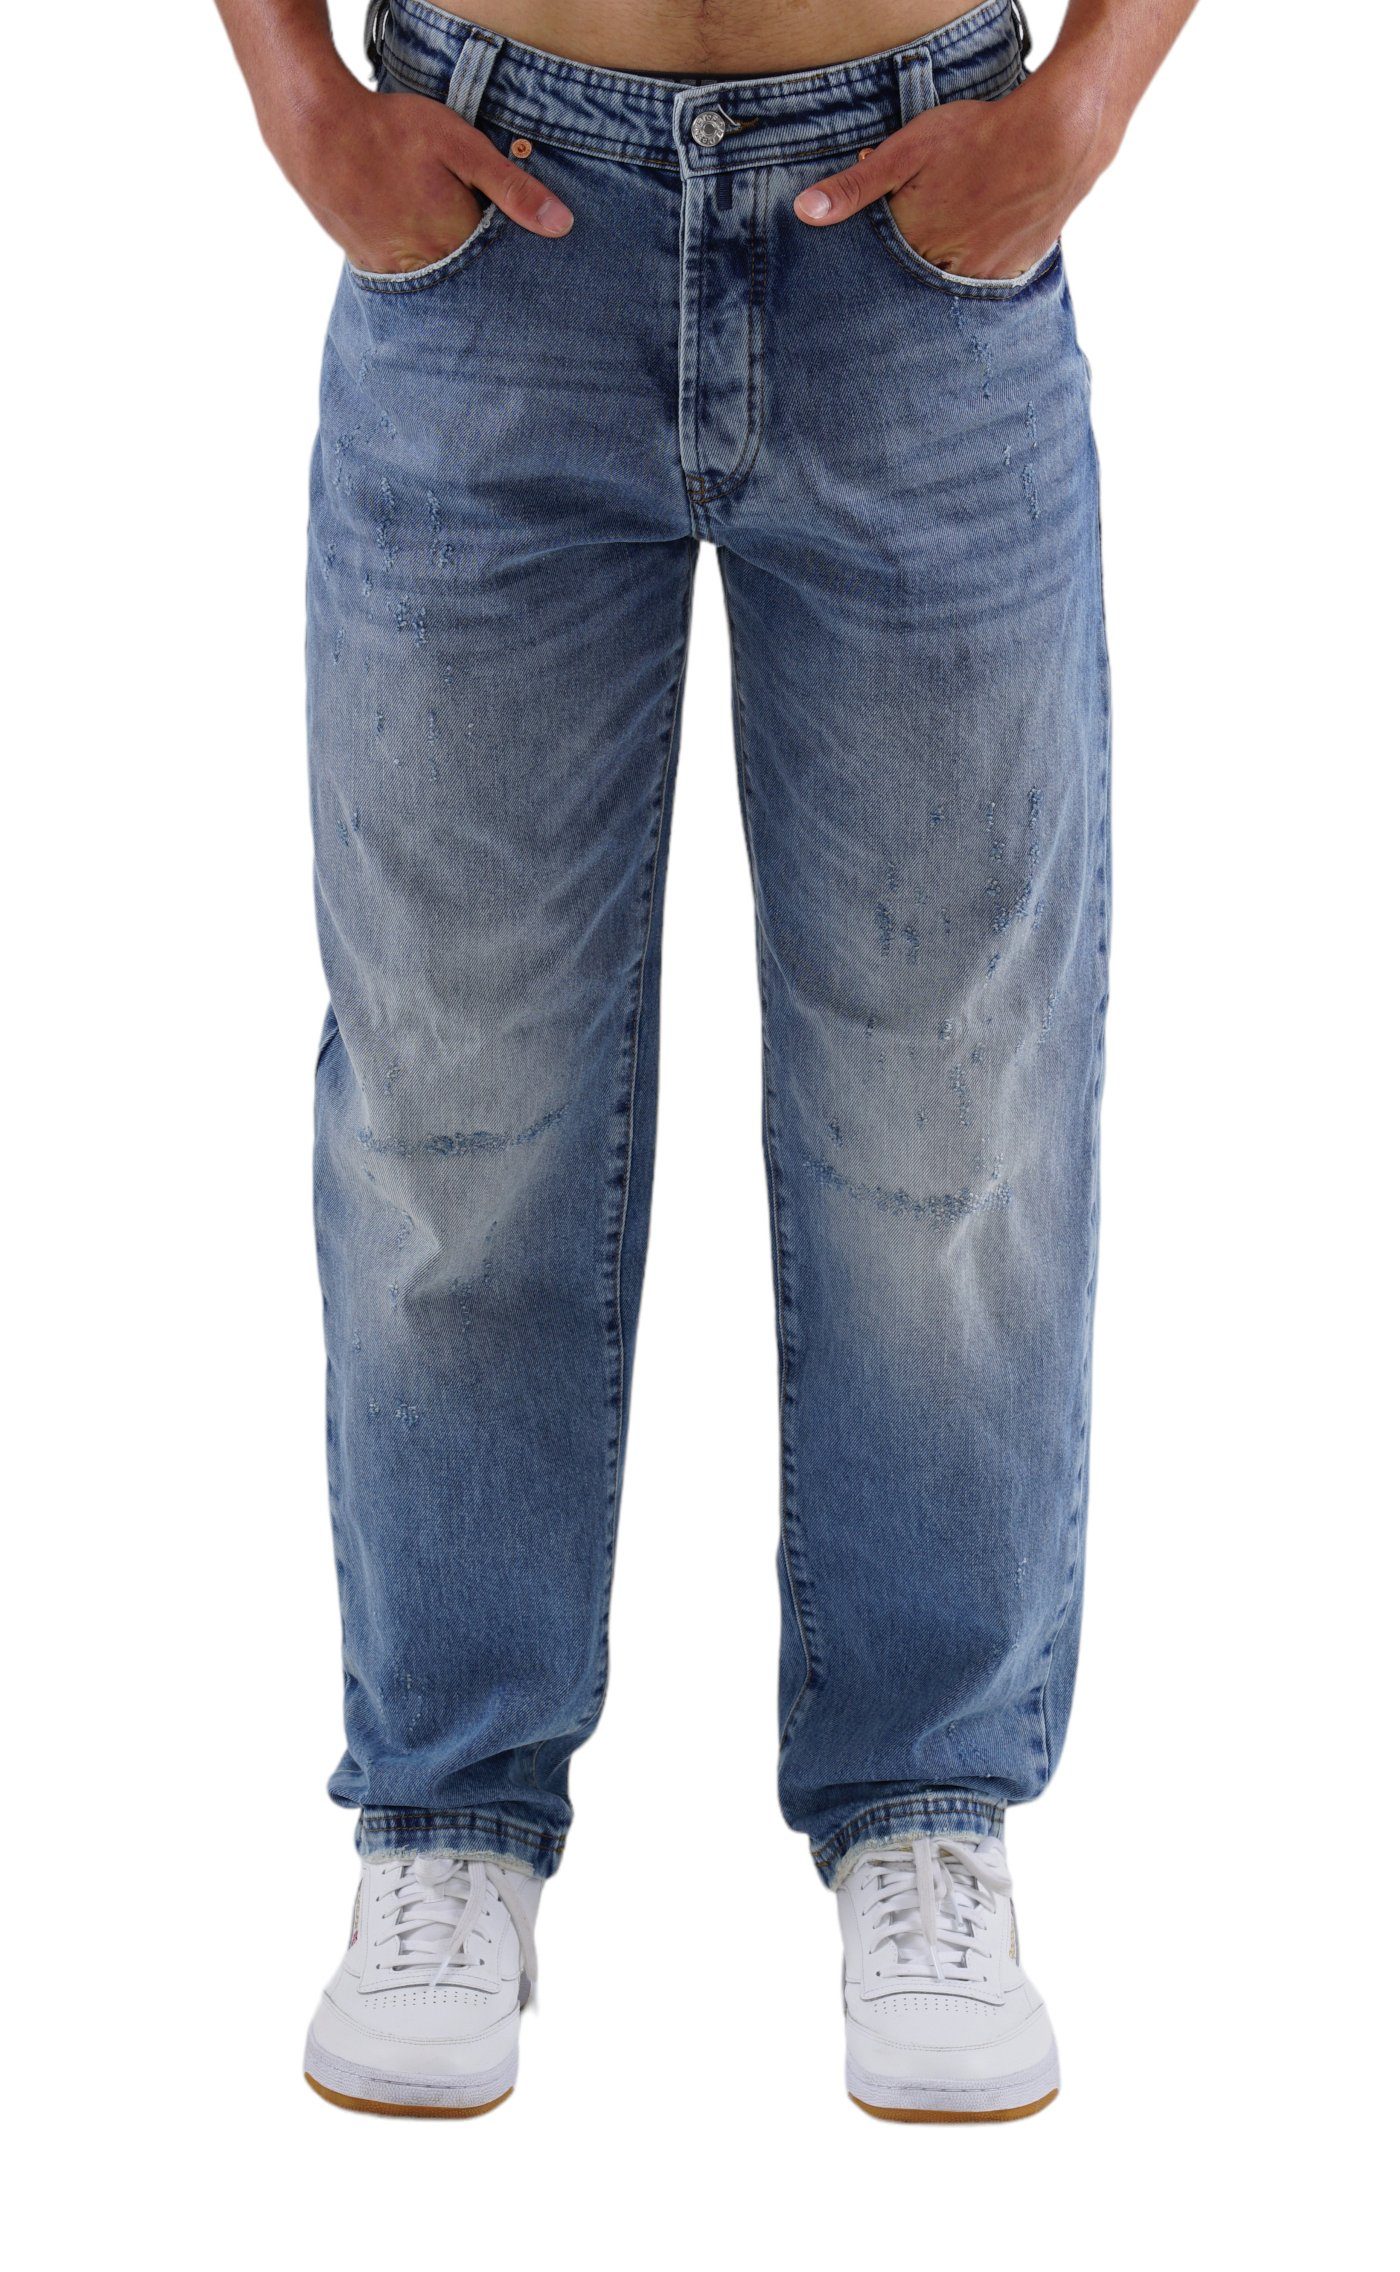 PICALDI Jeans Weite Jeans Zicco 472 Loose Fit, Relaxed Fit Oakland